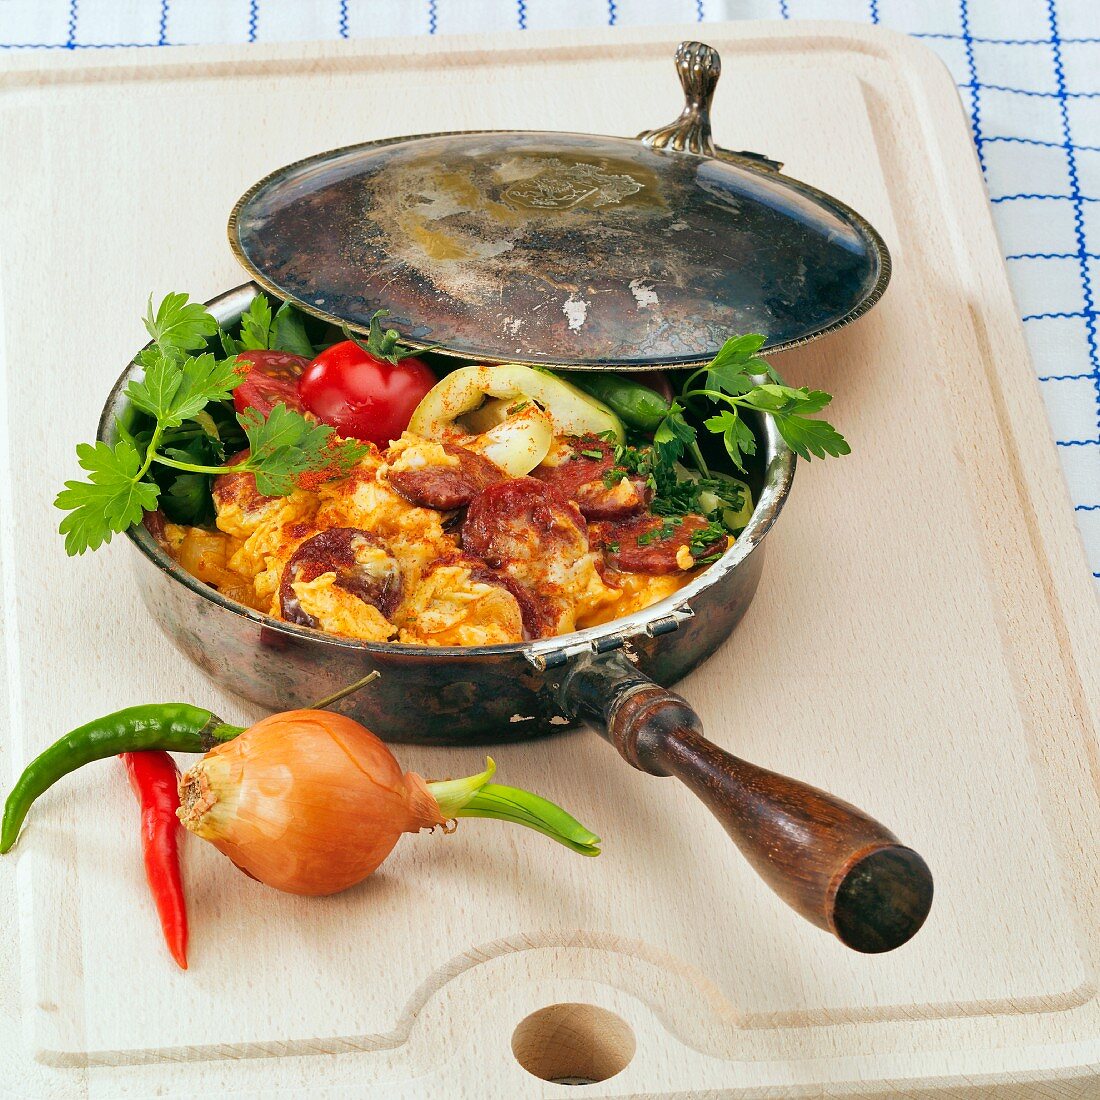 Omelette with kolbasz, peppers and tomato (Hungary)